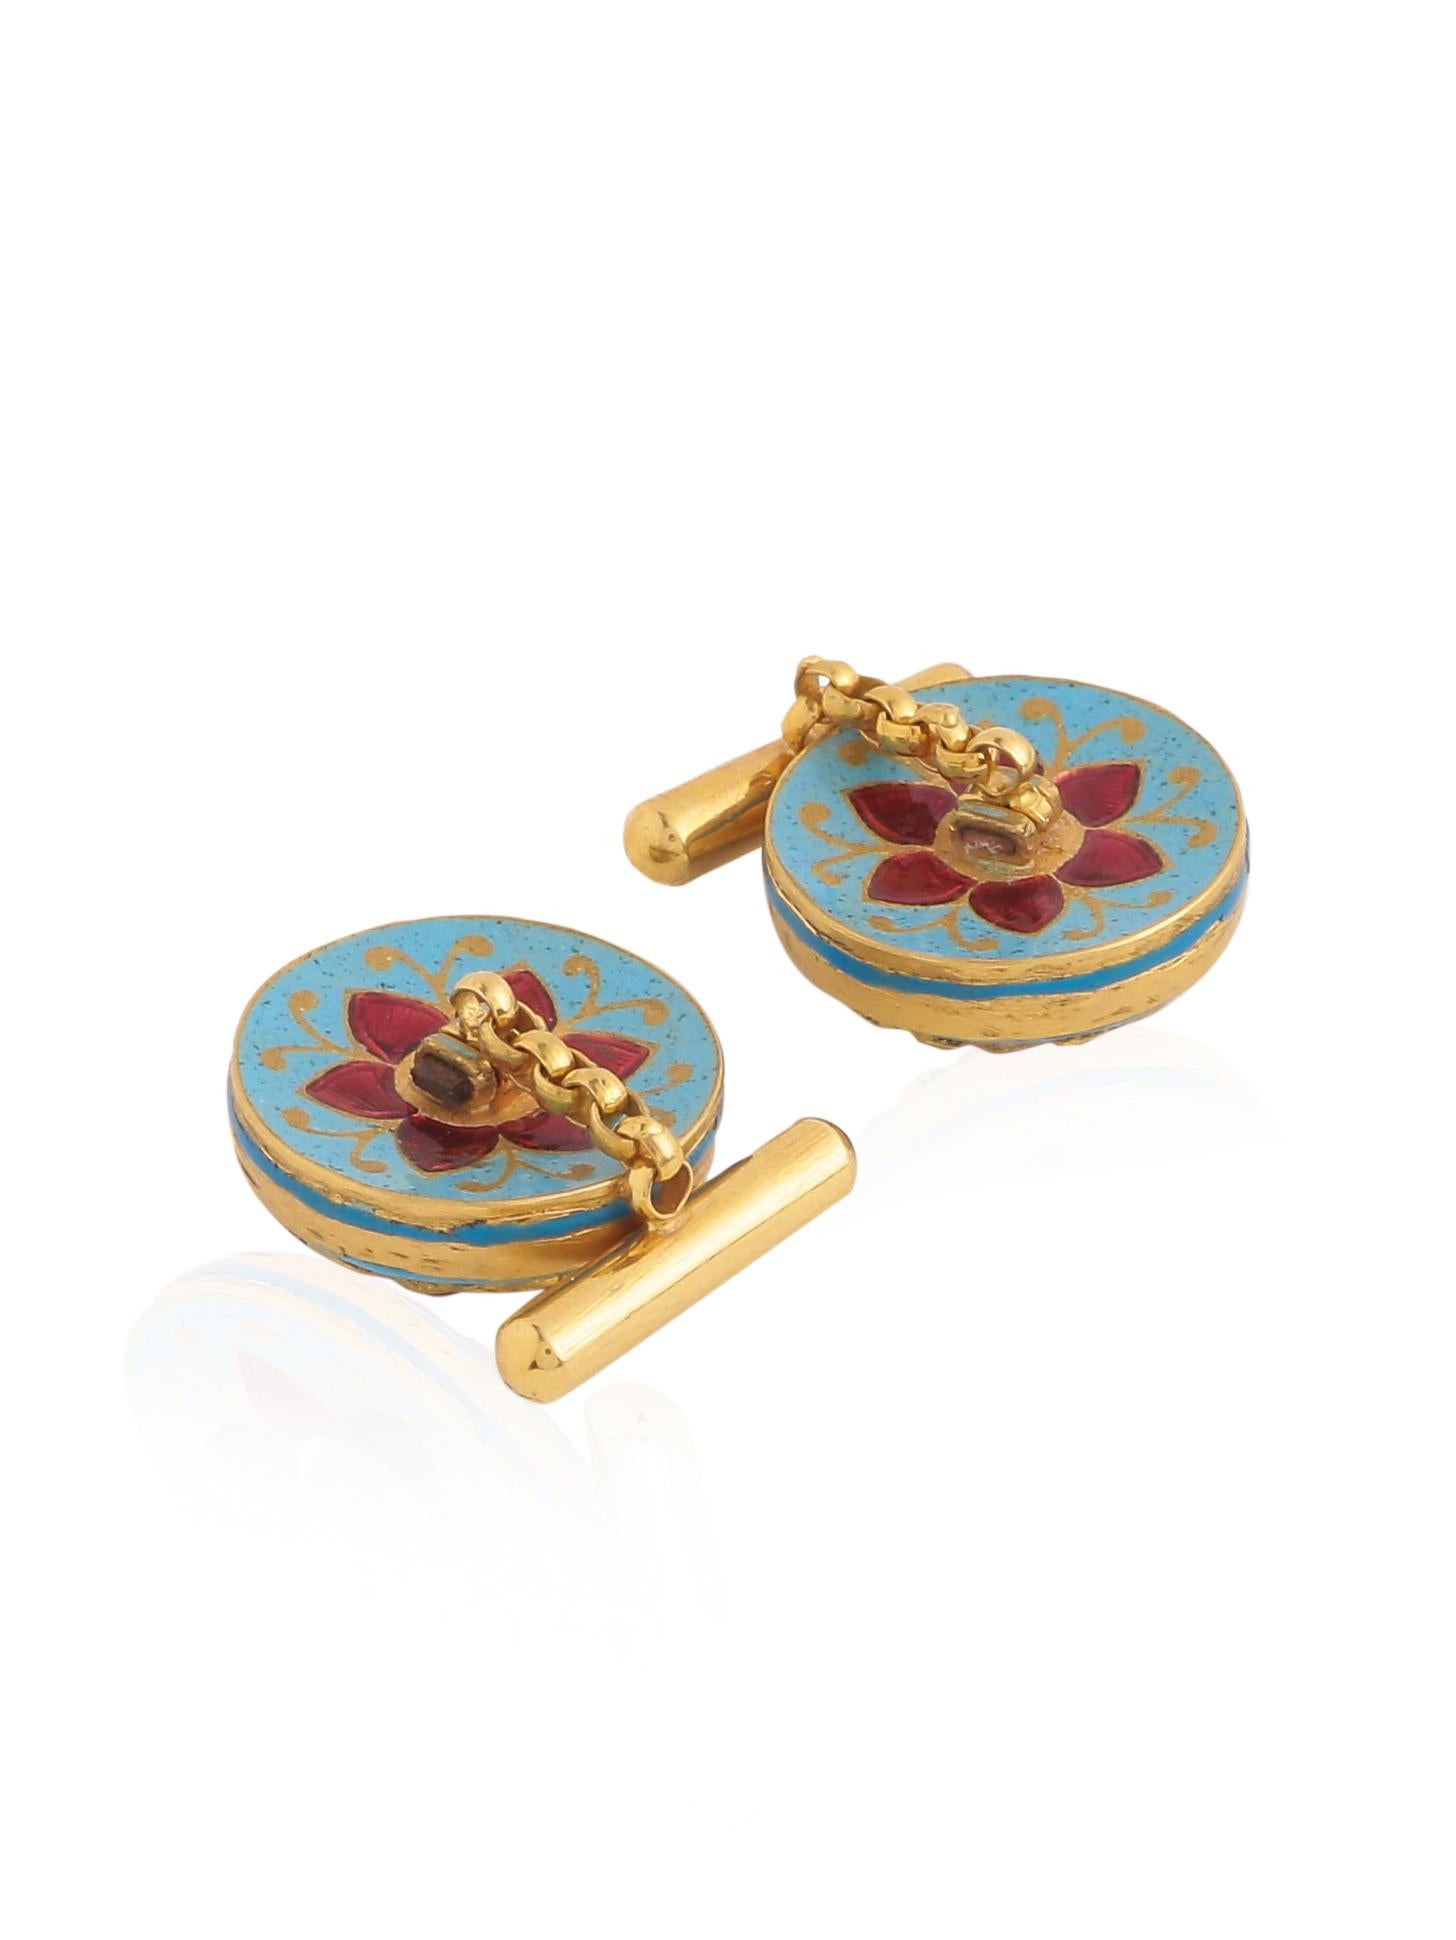 Cabochon Cufflinks Handcrafted in 18 Karat Gold with Diamonds Rubies and Fine Enamel Work